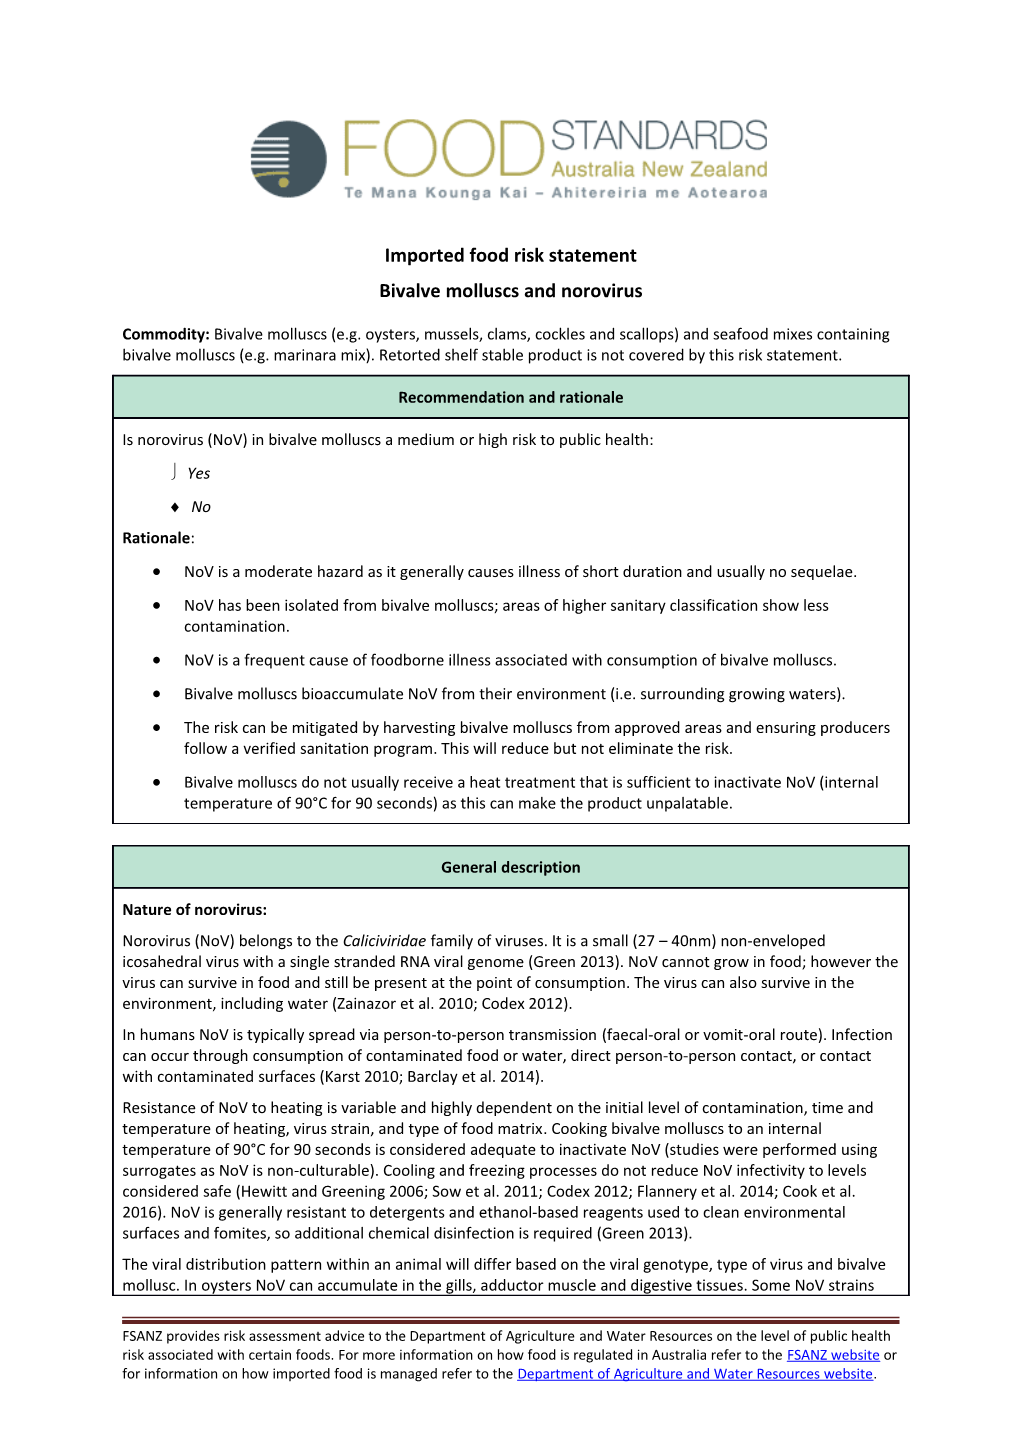 Imported Food Risk Statement: Bivalve Molluscs and Norovirus